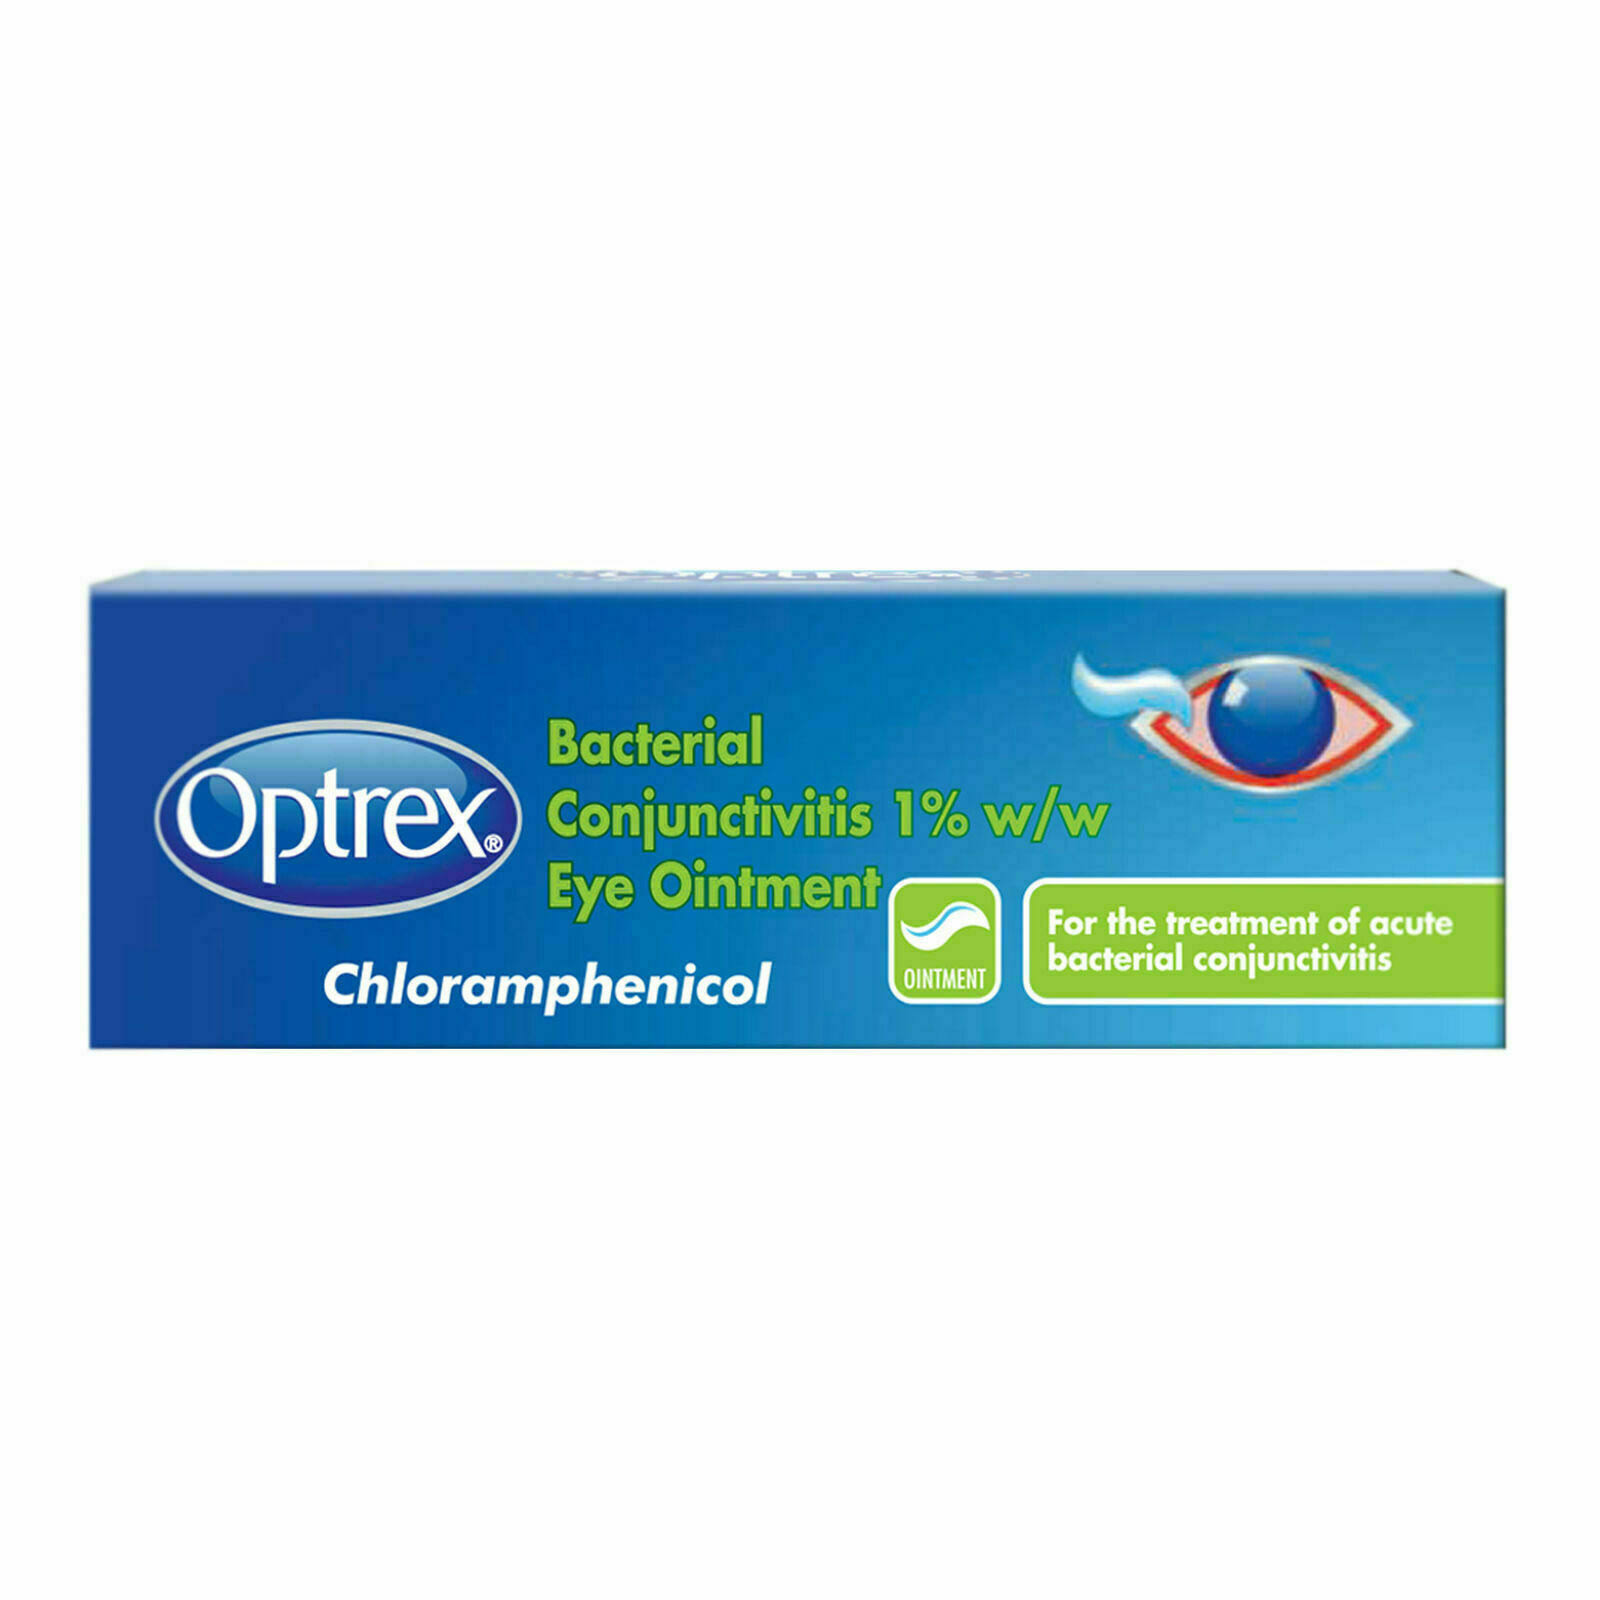 Optrex Bacterial Conjunctivitis 1% Eye Ointment - 4G